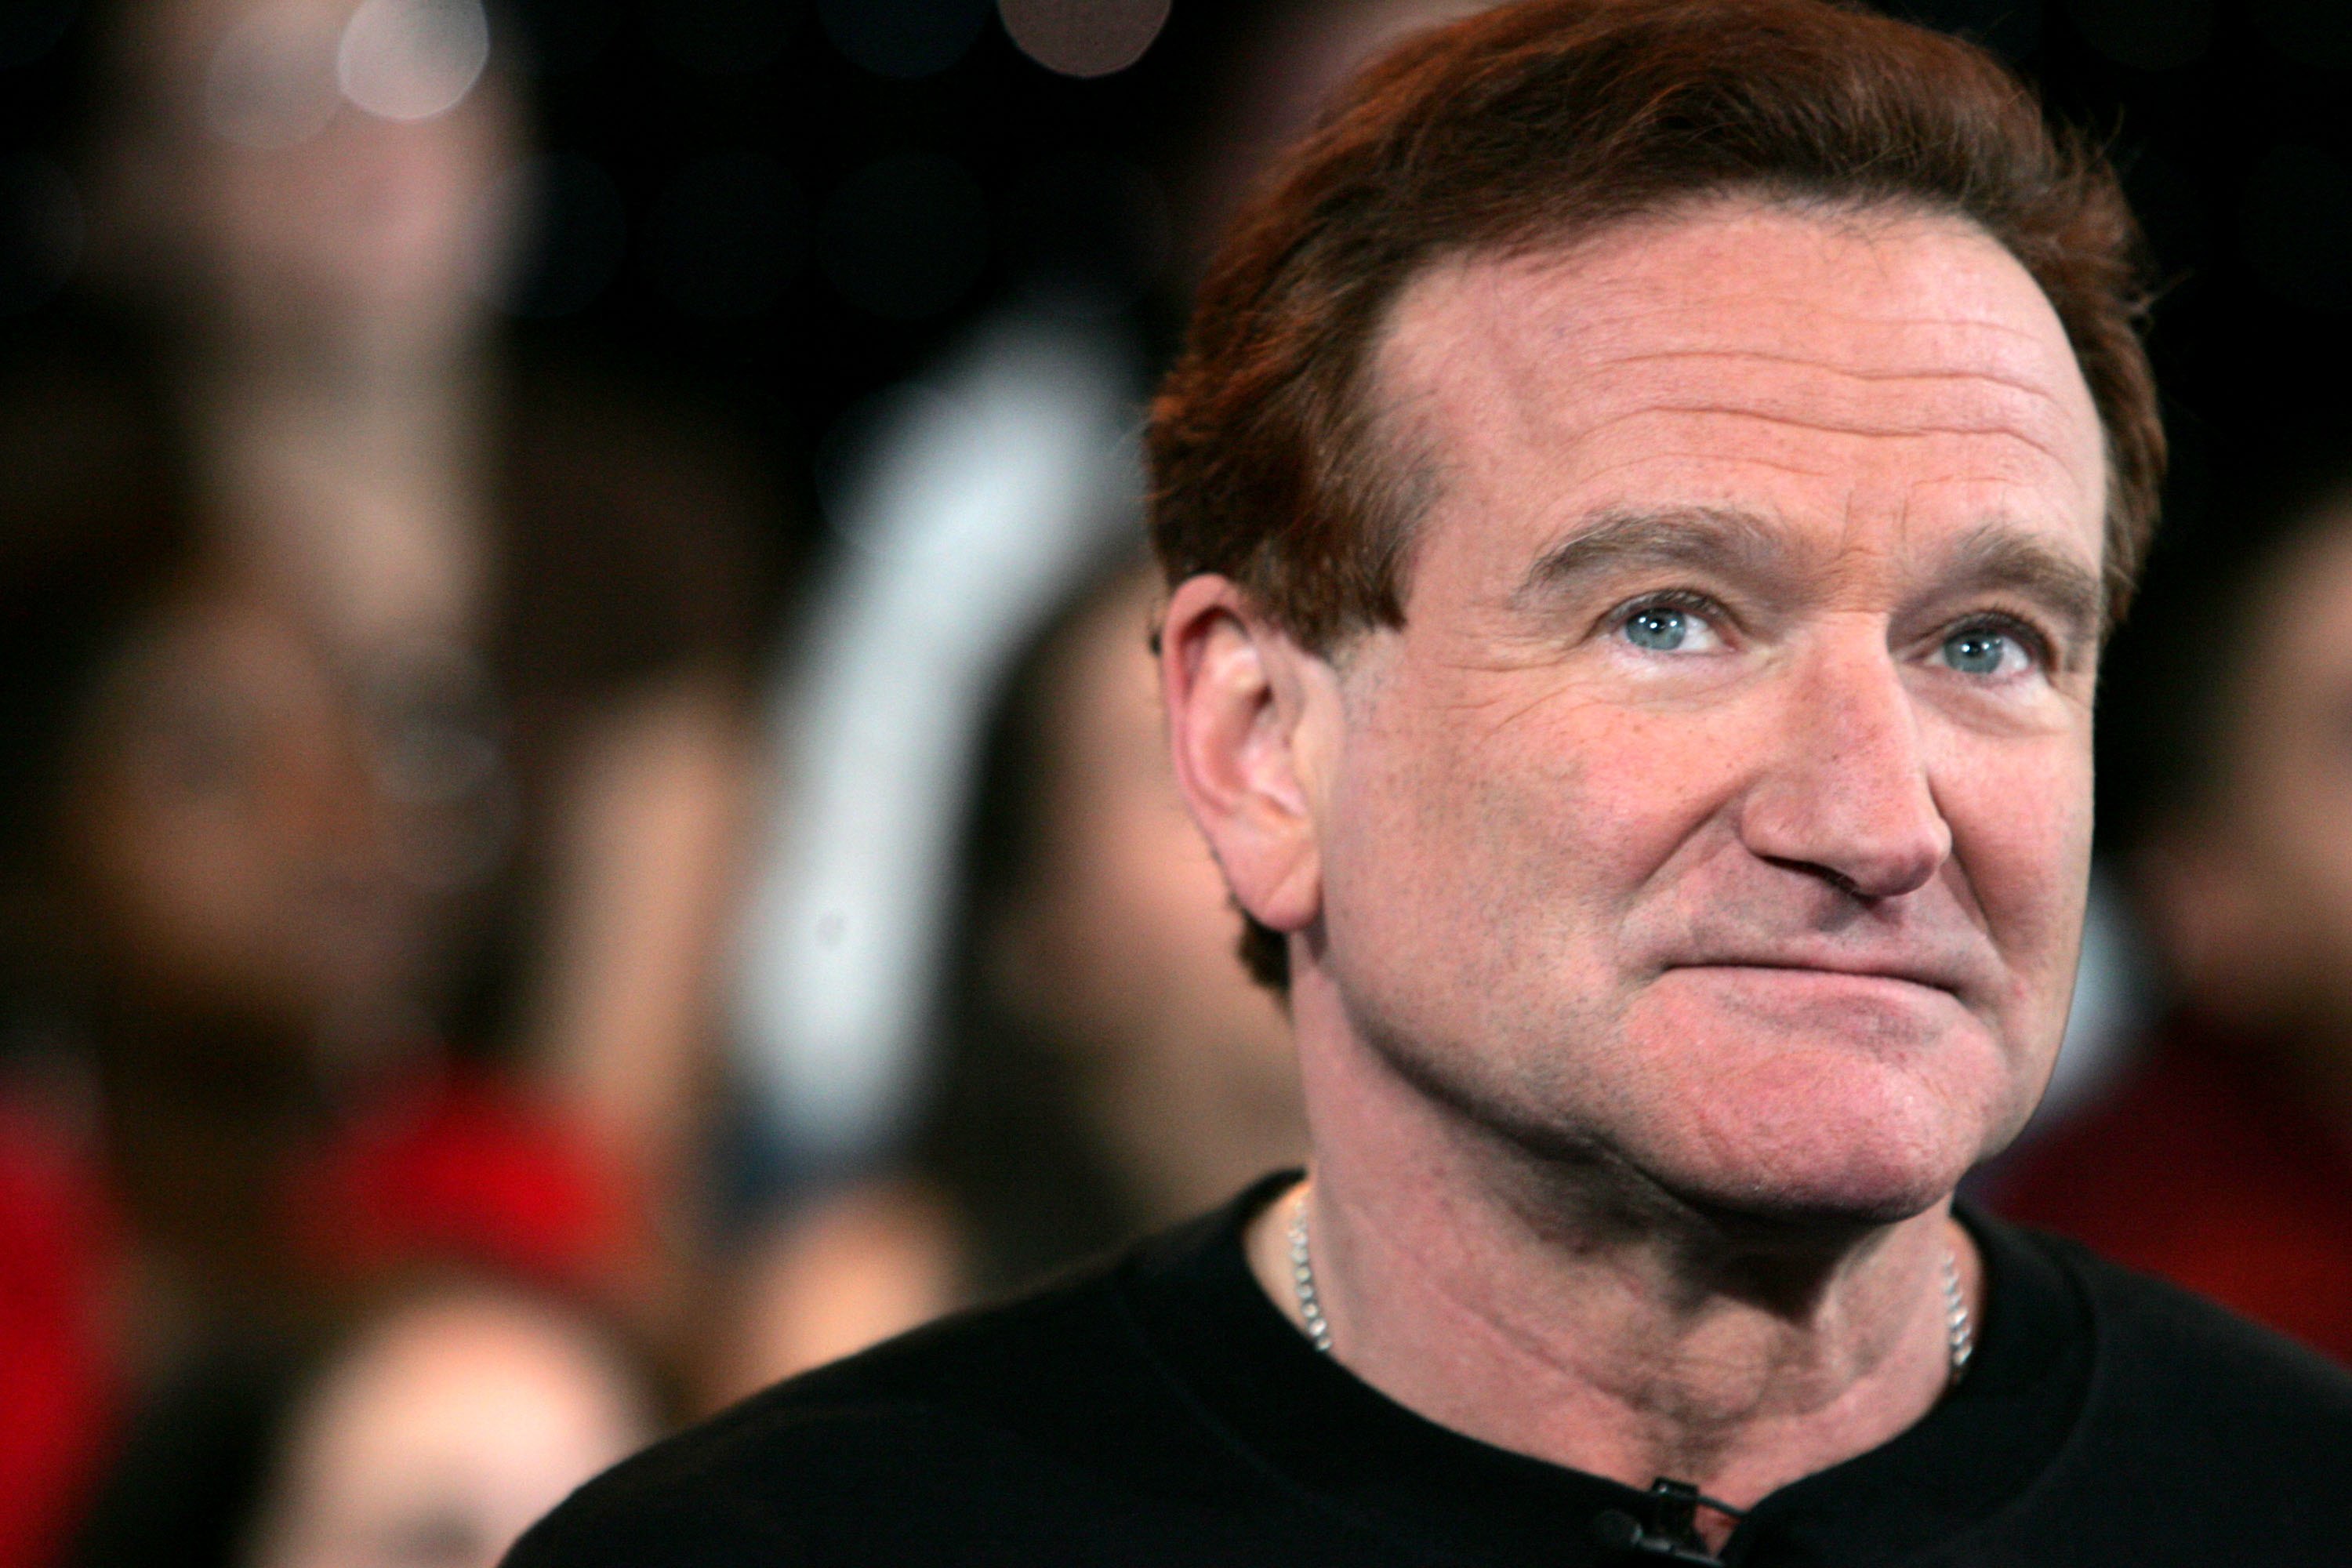 Robin Williams onstage during MTV's Total Request Live on April 27, 2006, in New York City | Source: Getty Images